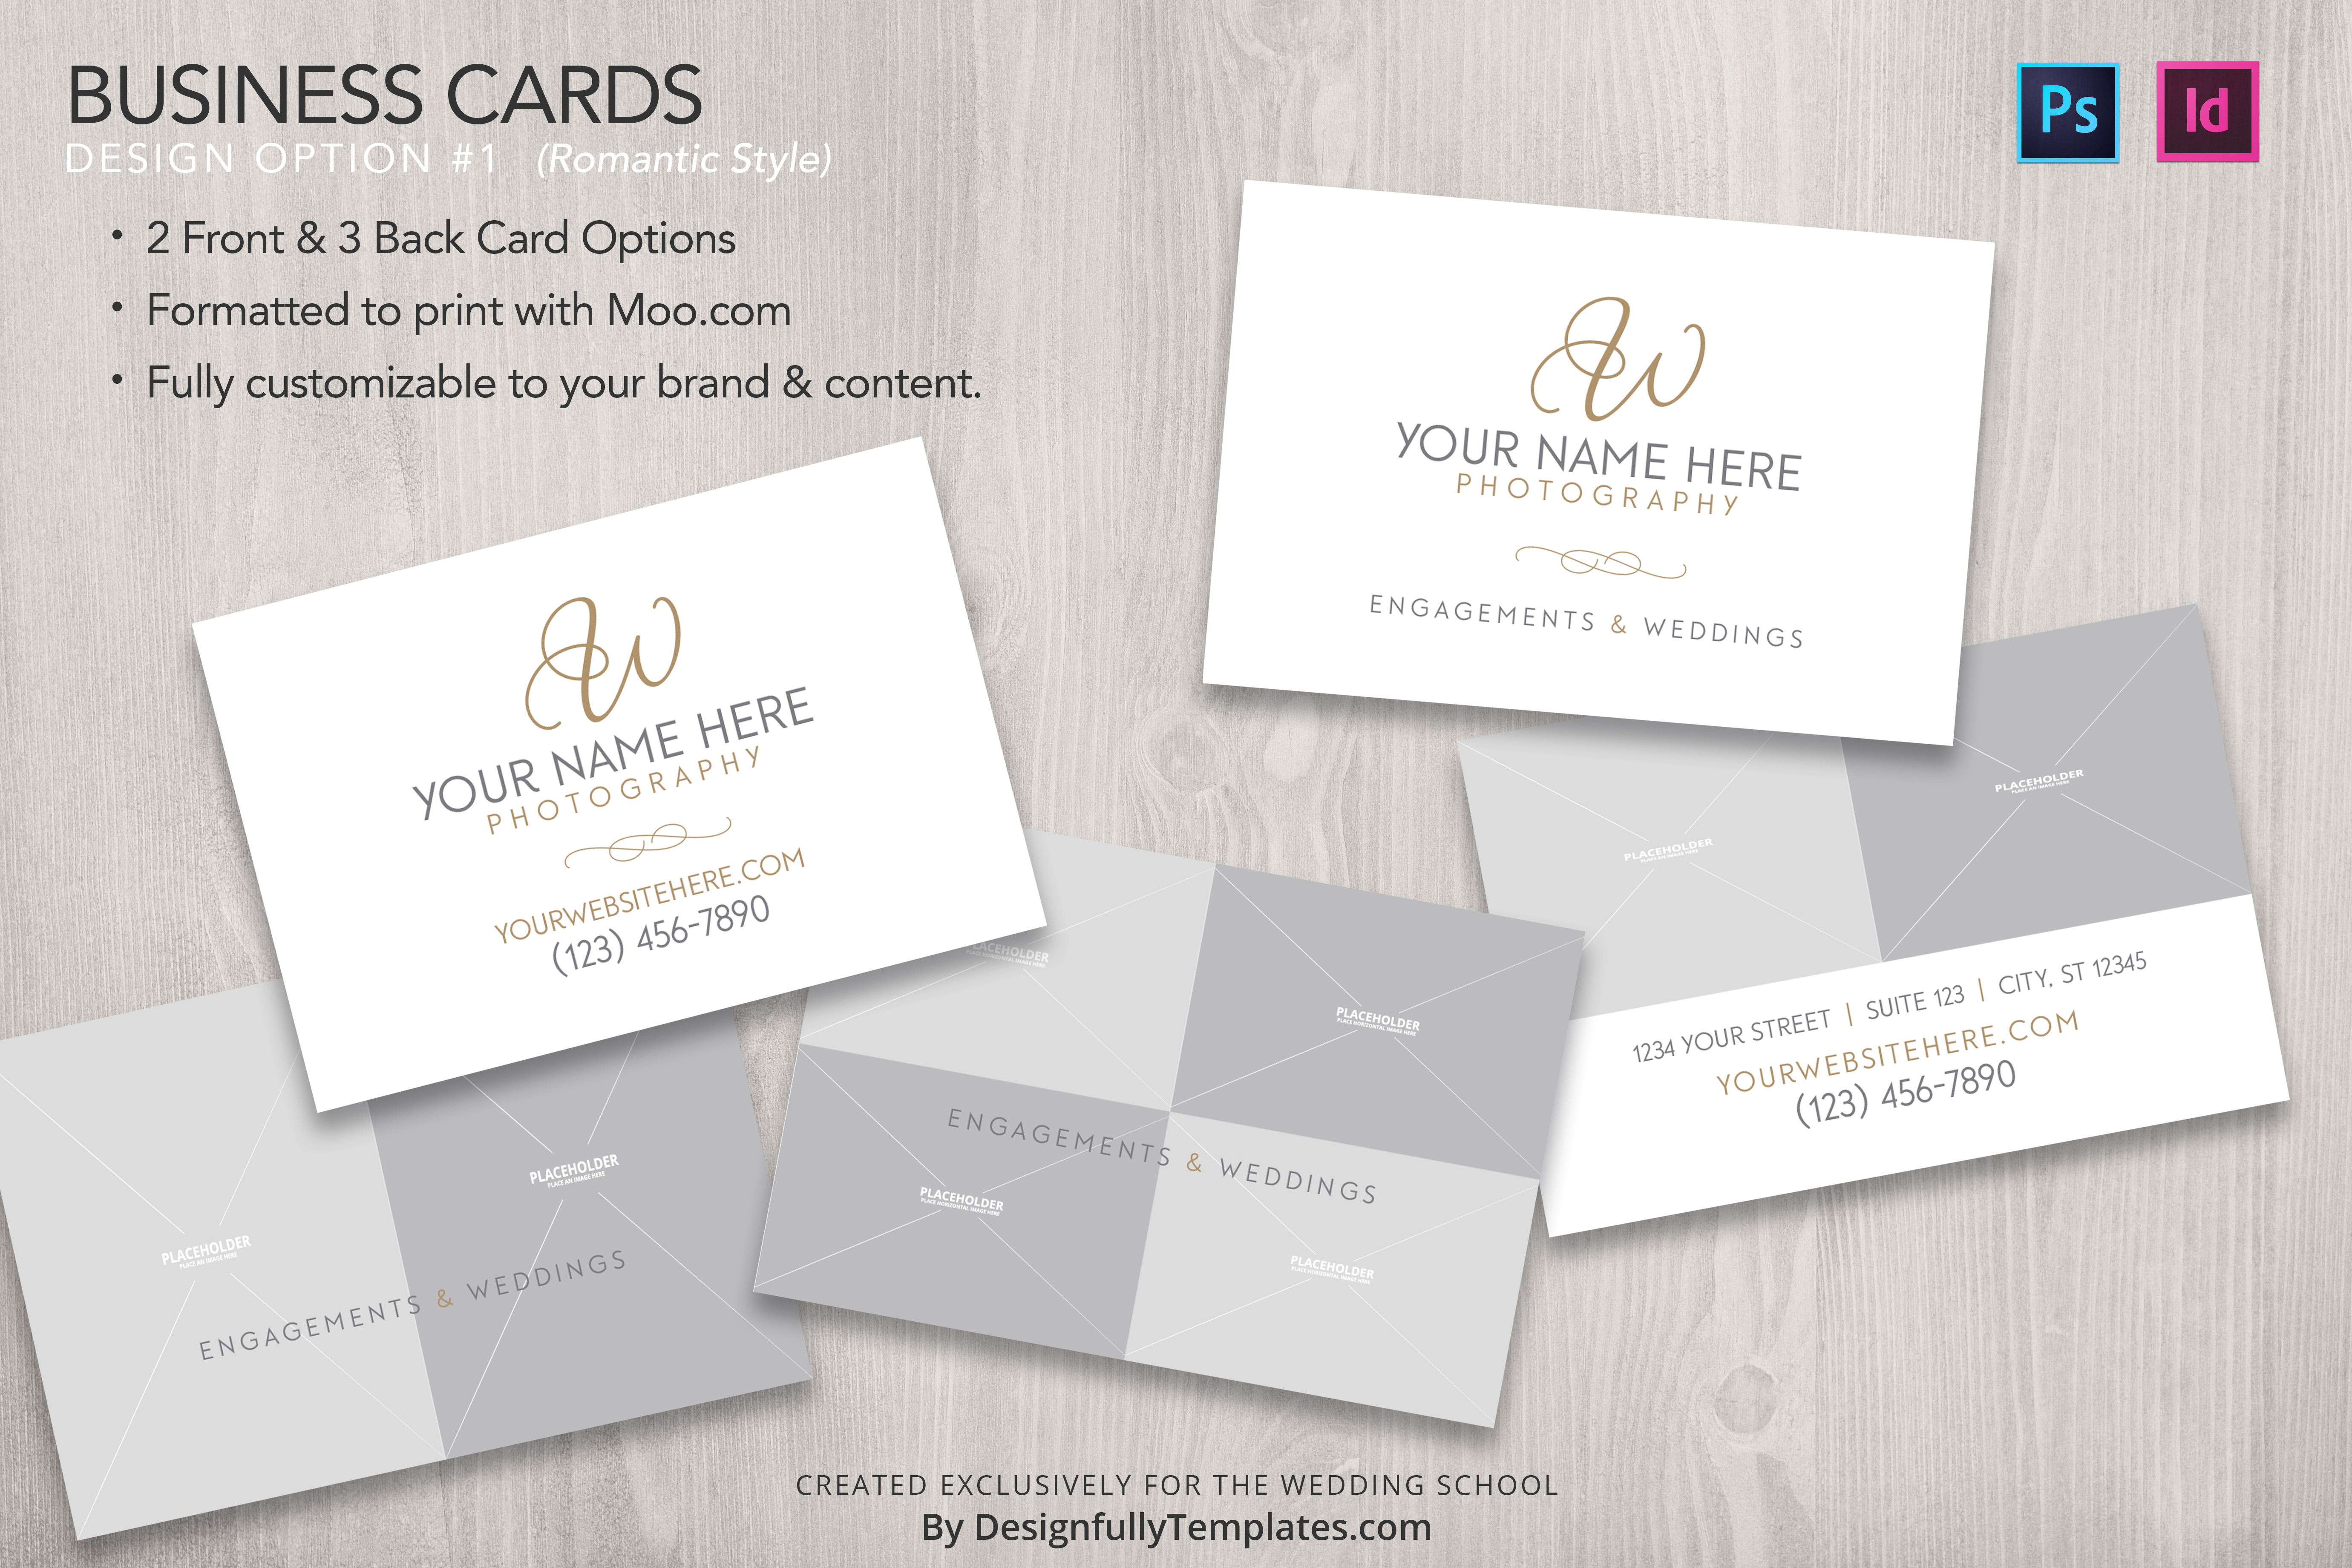 Templates for Wedding Graphers Bundle Of Funny Business Cards Templates